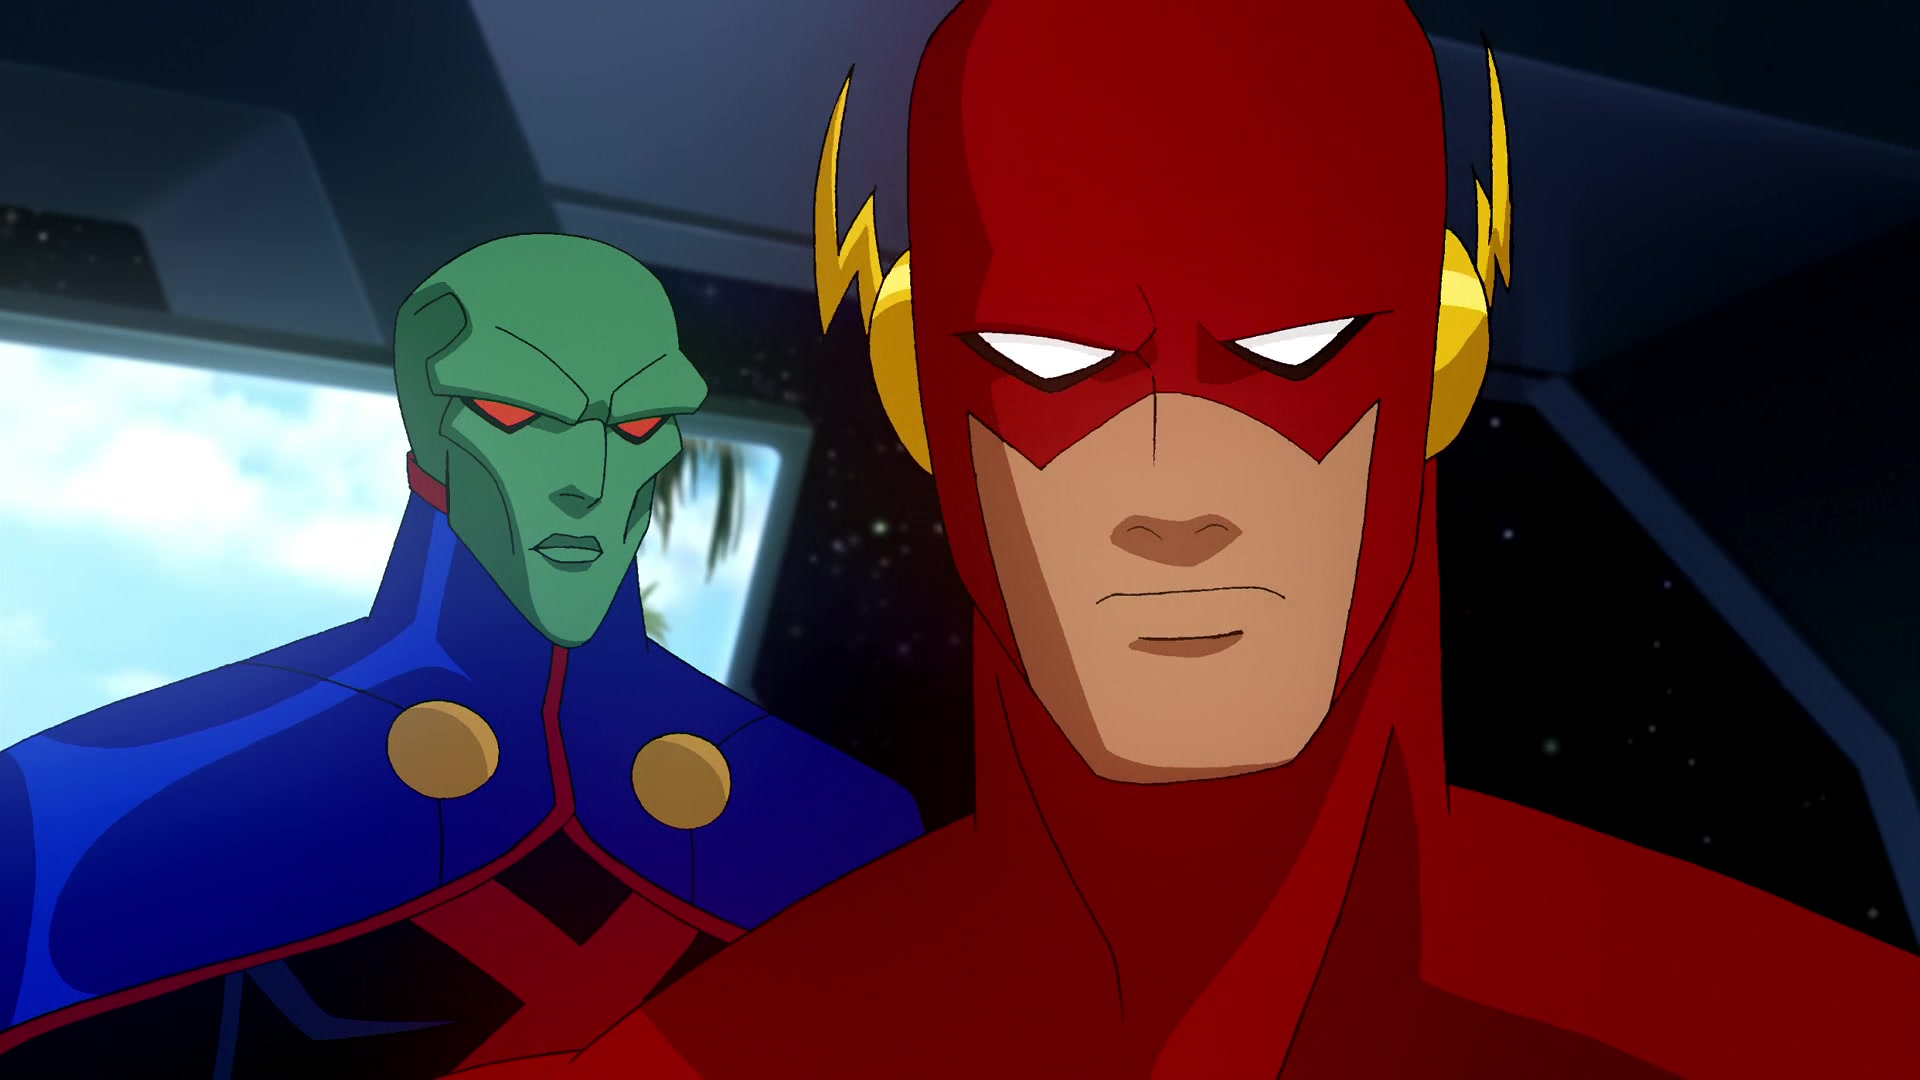 movie, justice league: crisis on two earths, flash, j'onn j'onzz, martian manhunter, wally west